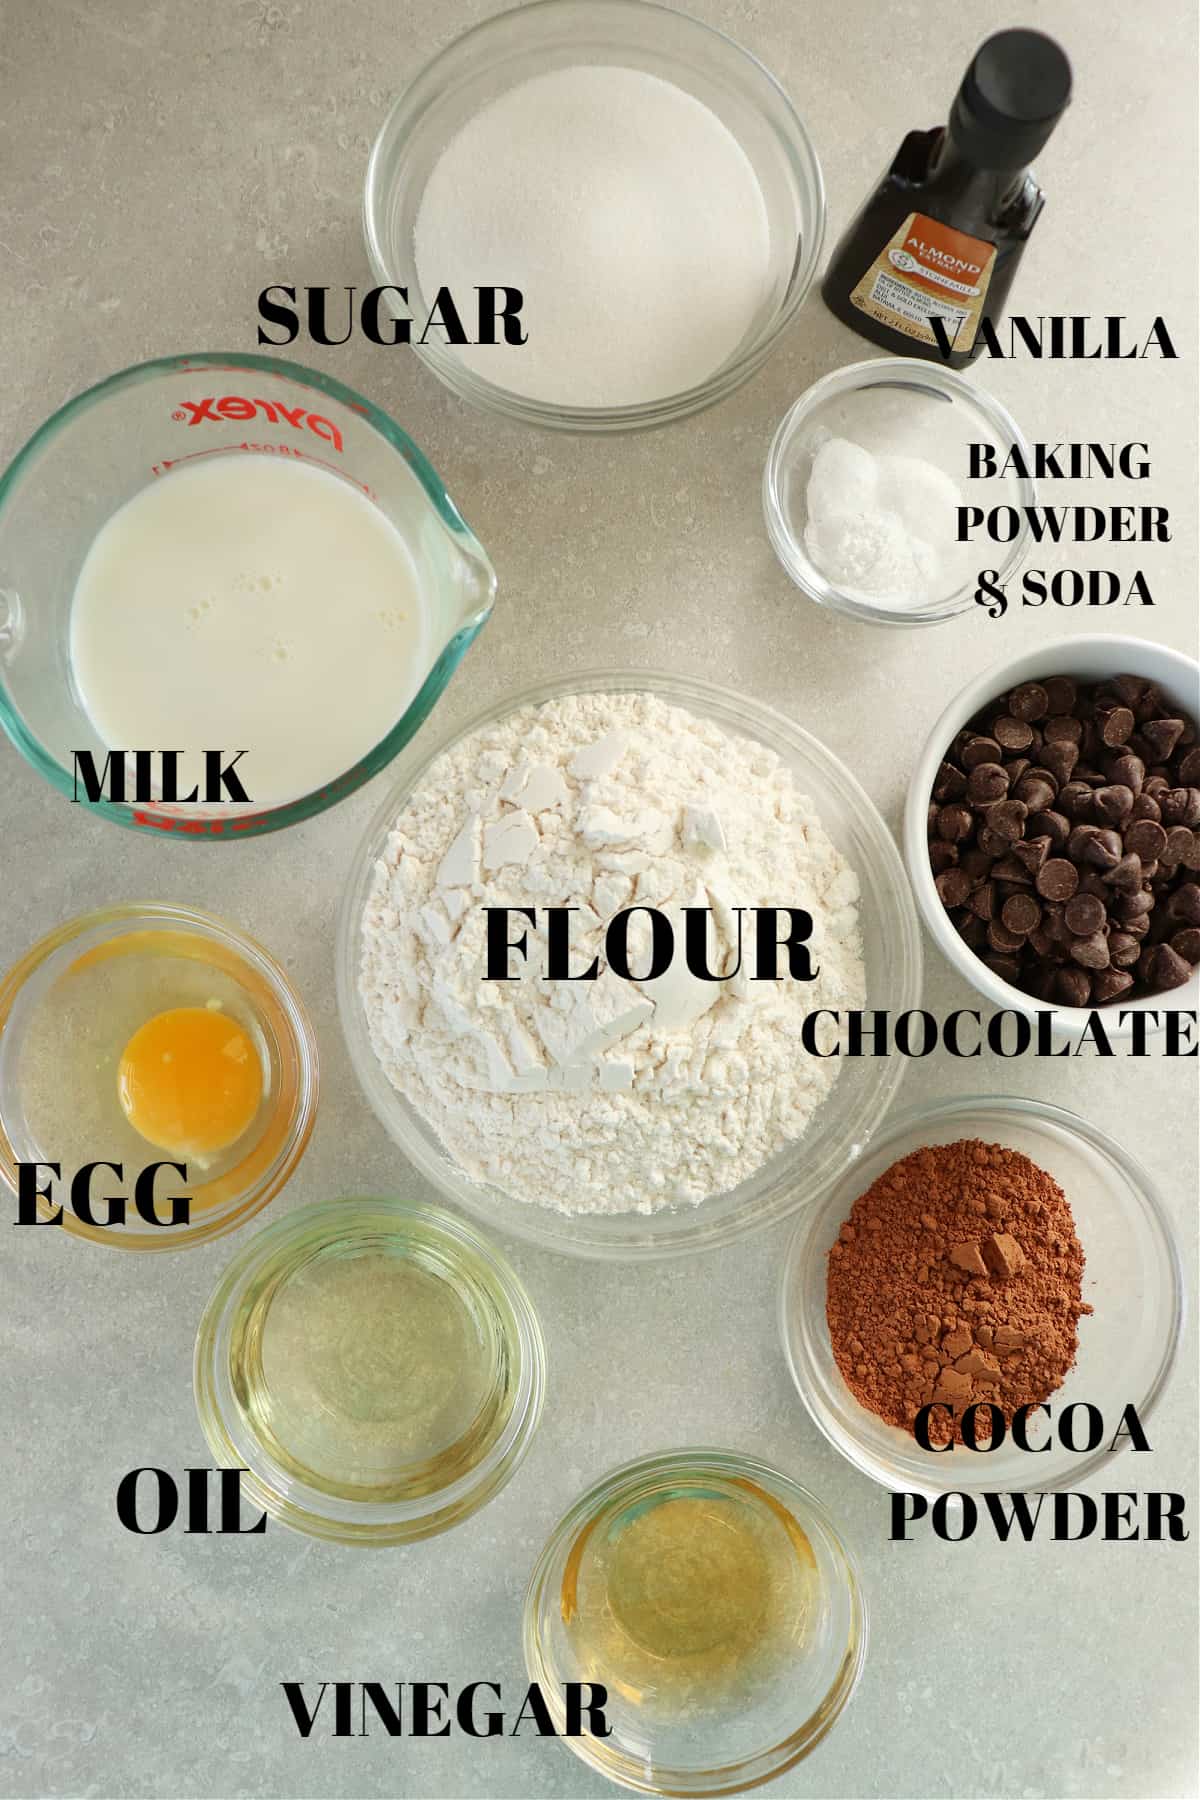 All ingredients for making chocolate muffins in small glass bowls on a gray board.